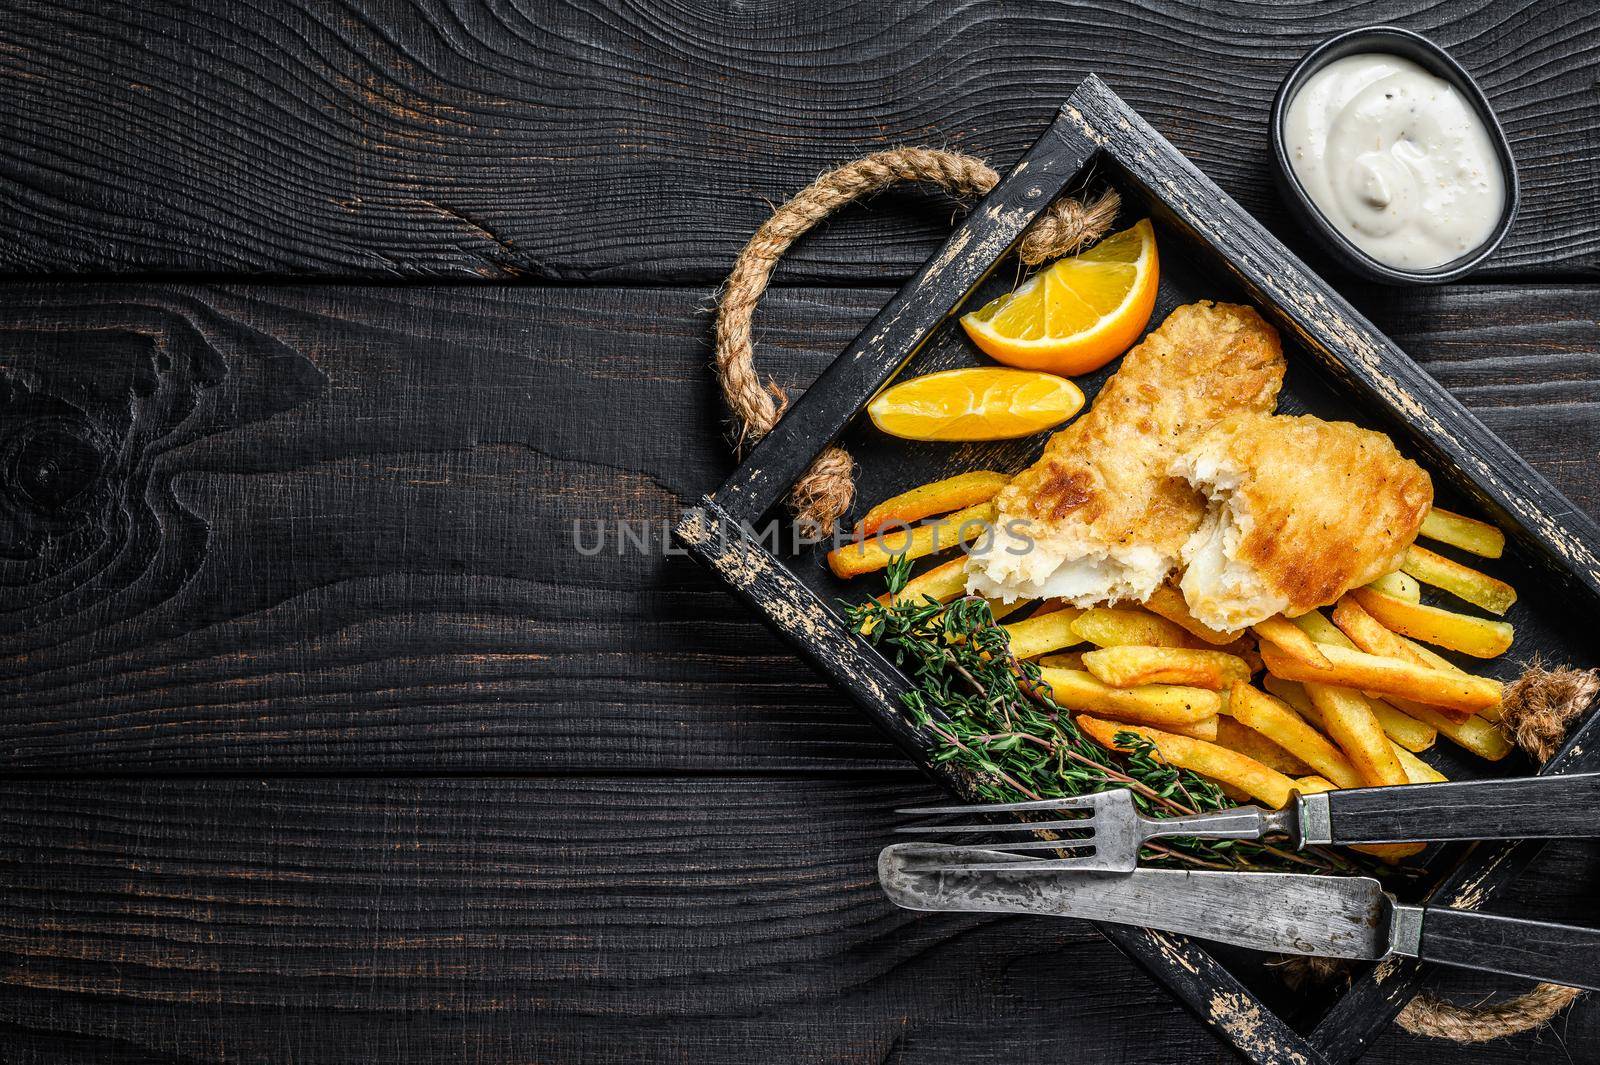 Battered Fish and chips dish with french fries and tartar sauce in a wooden tray. Black wooden background. Top view. Copy space by Composter